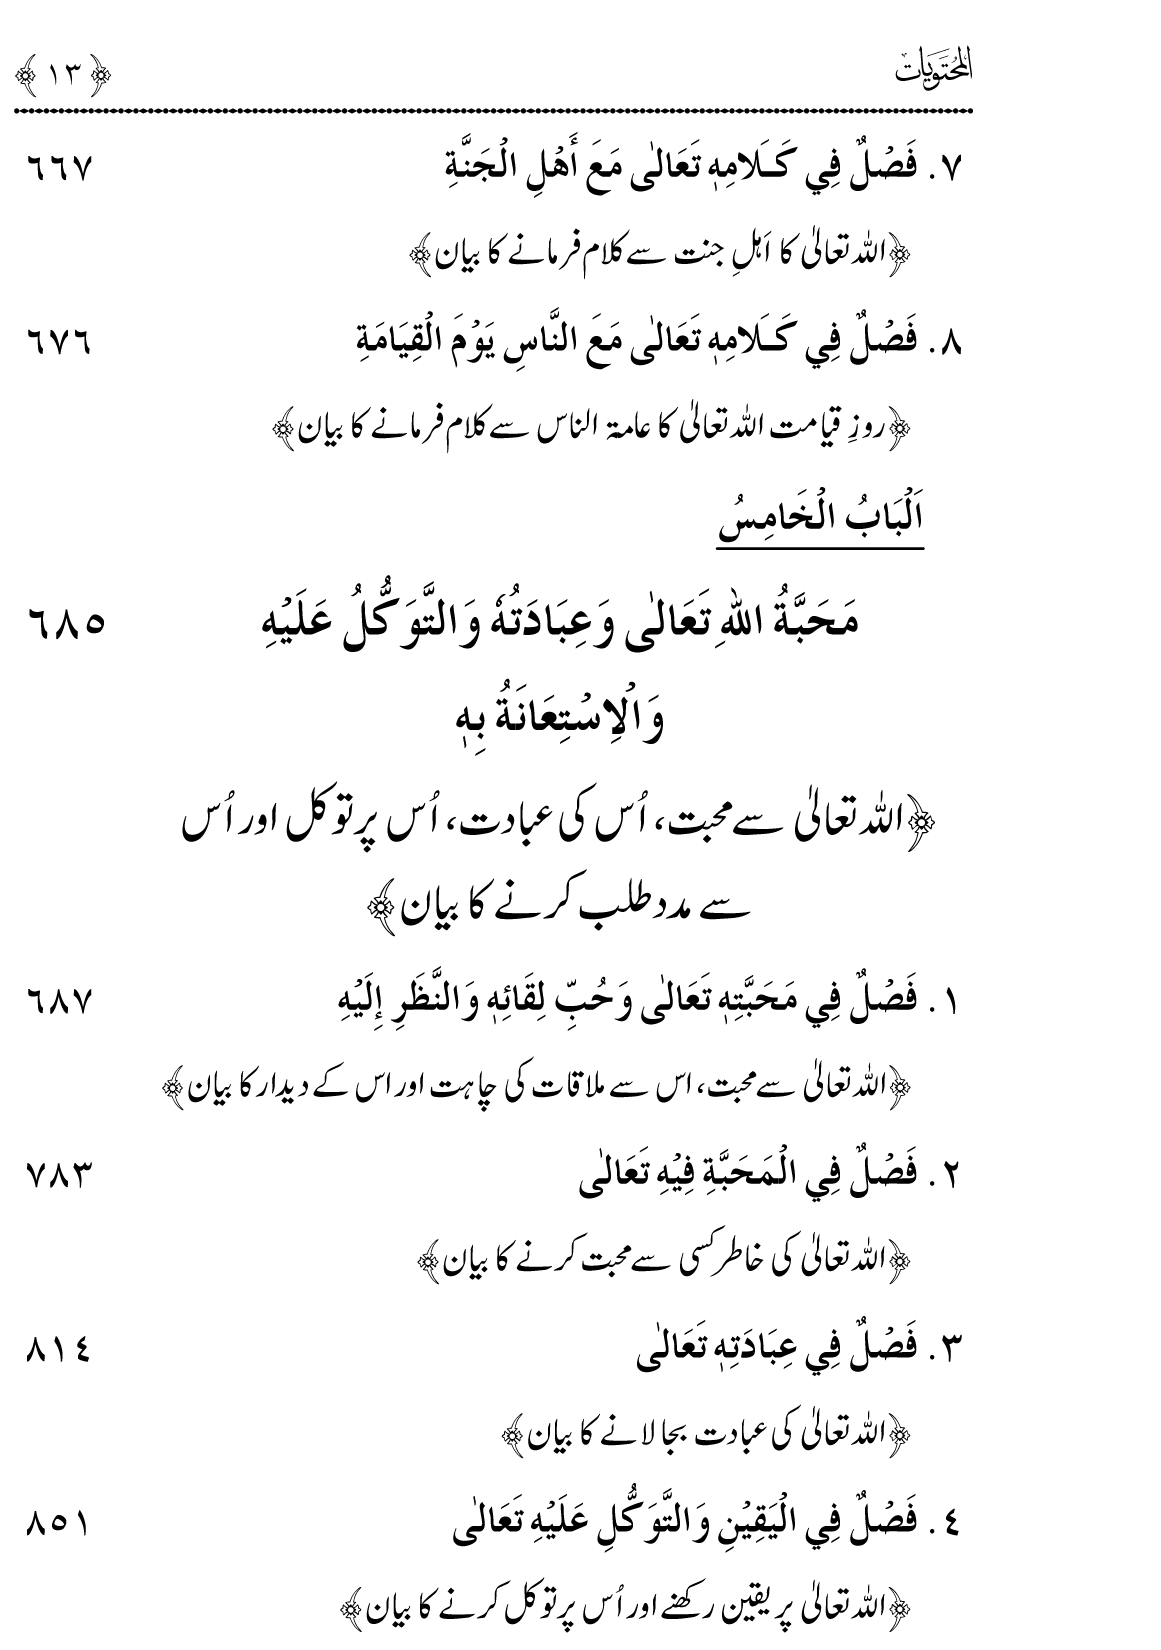 Ladders of Sunna for Deliverance from Deviation and Tribulations (Vol. 2)